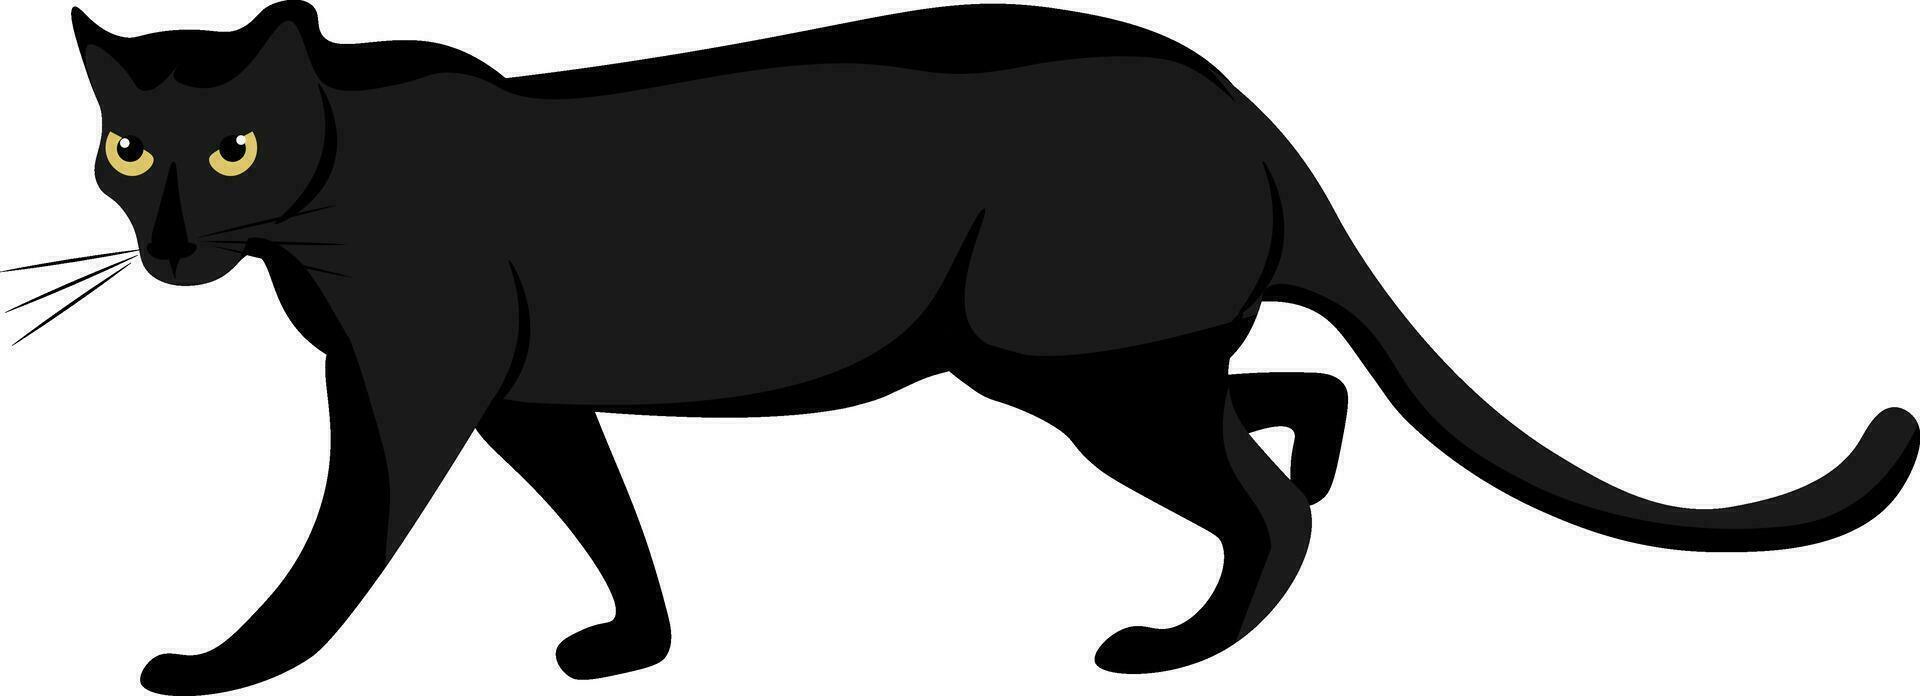 Cartoon panther set on isolated white background viewed from the side vector or color illustration